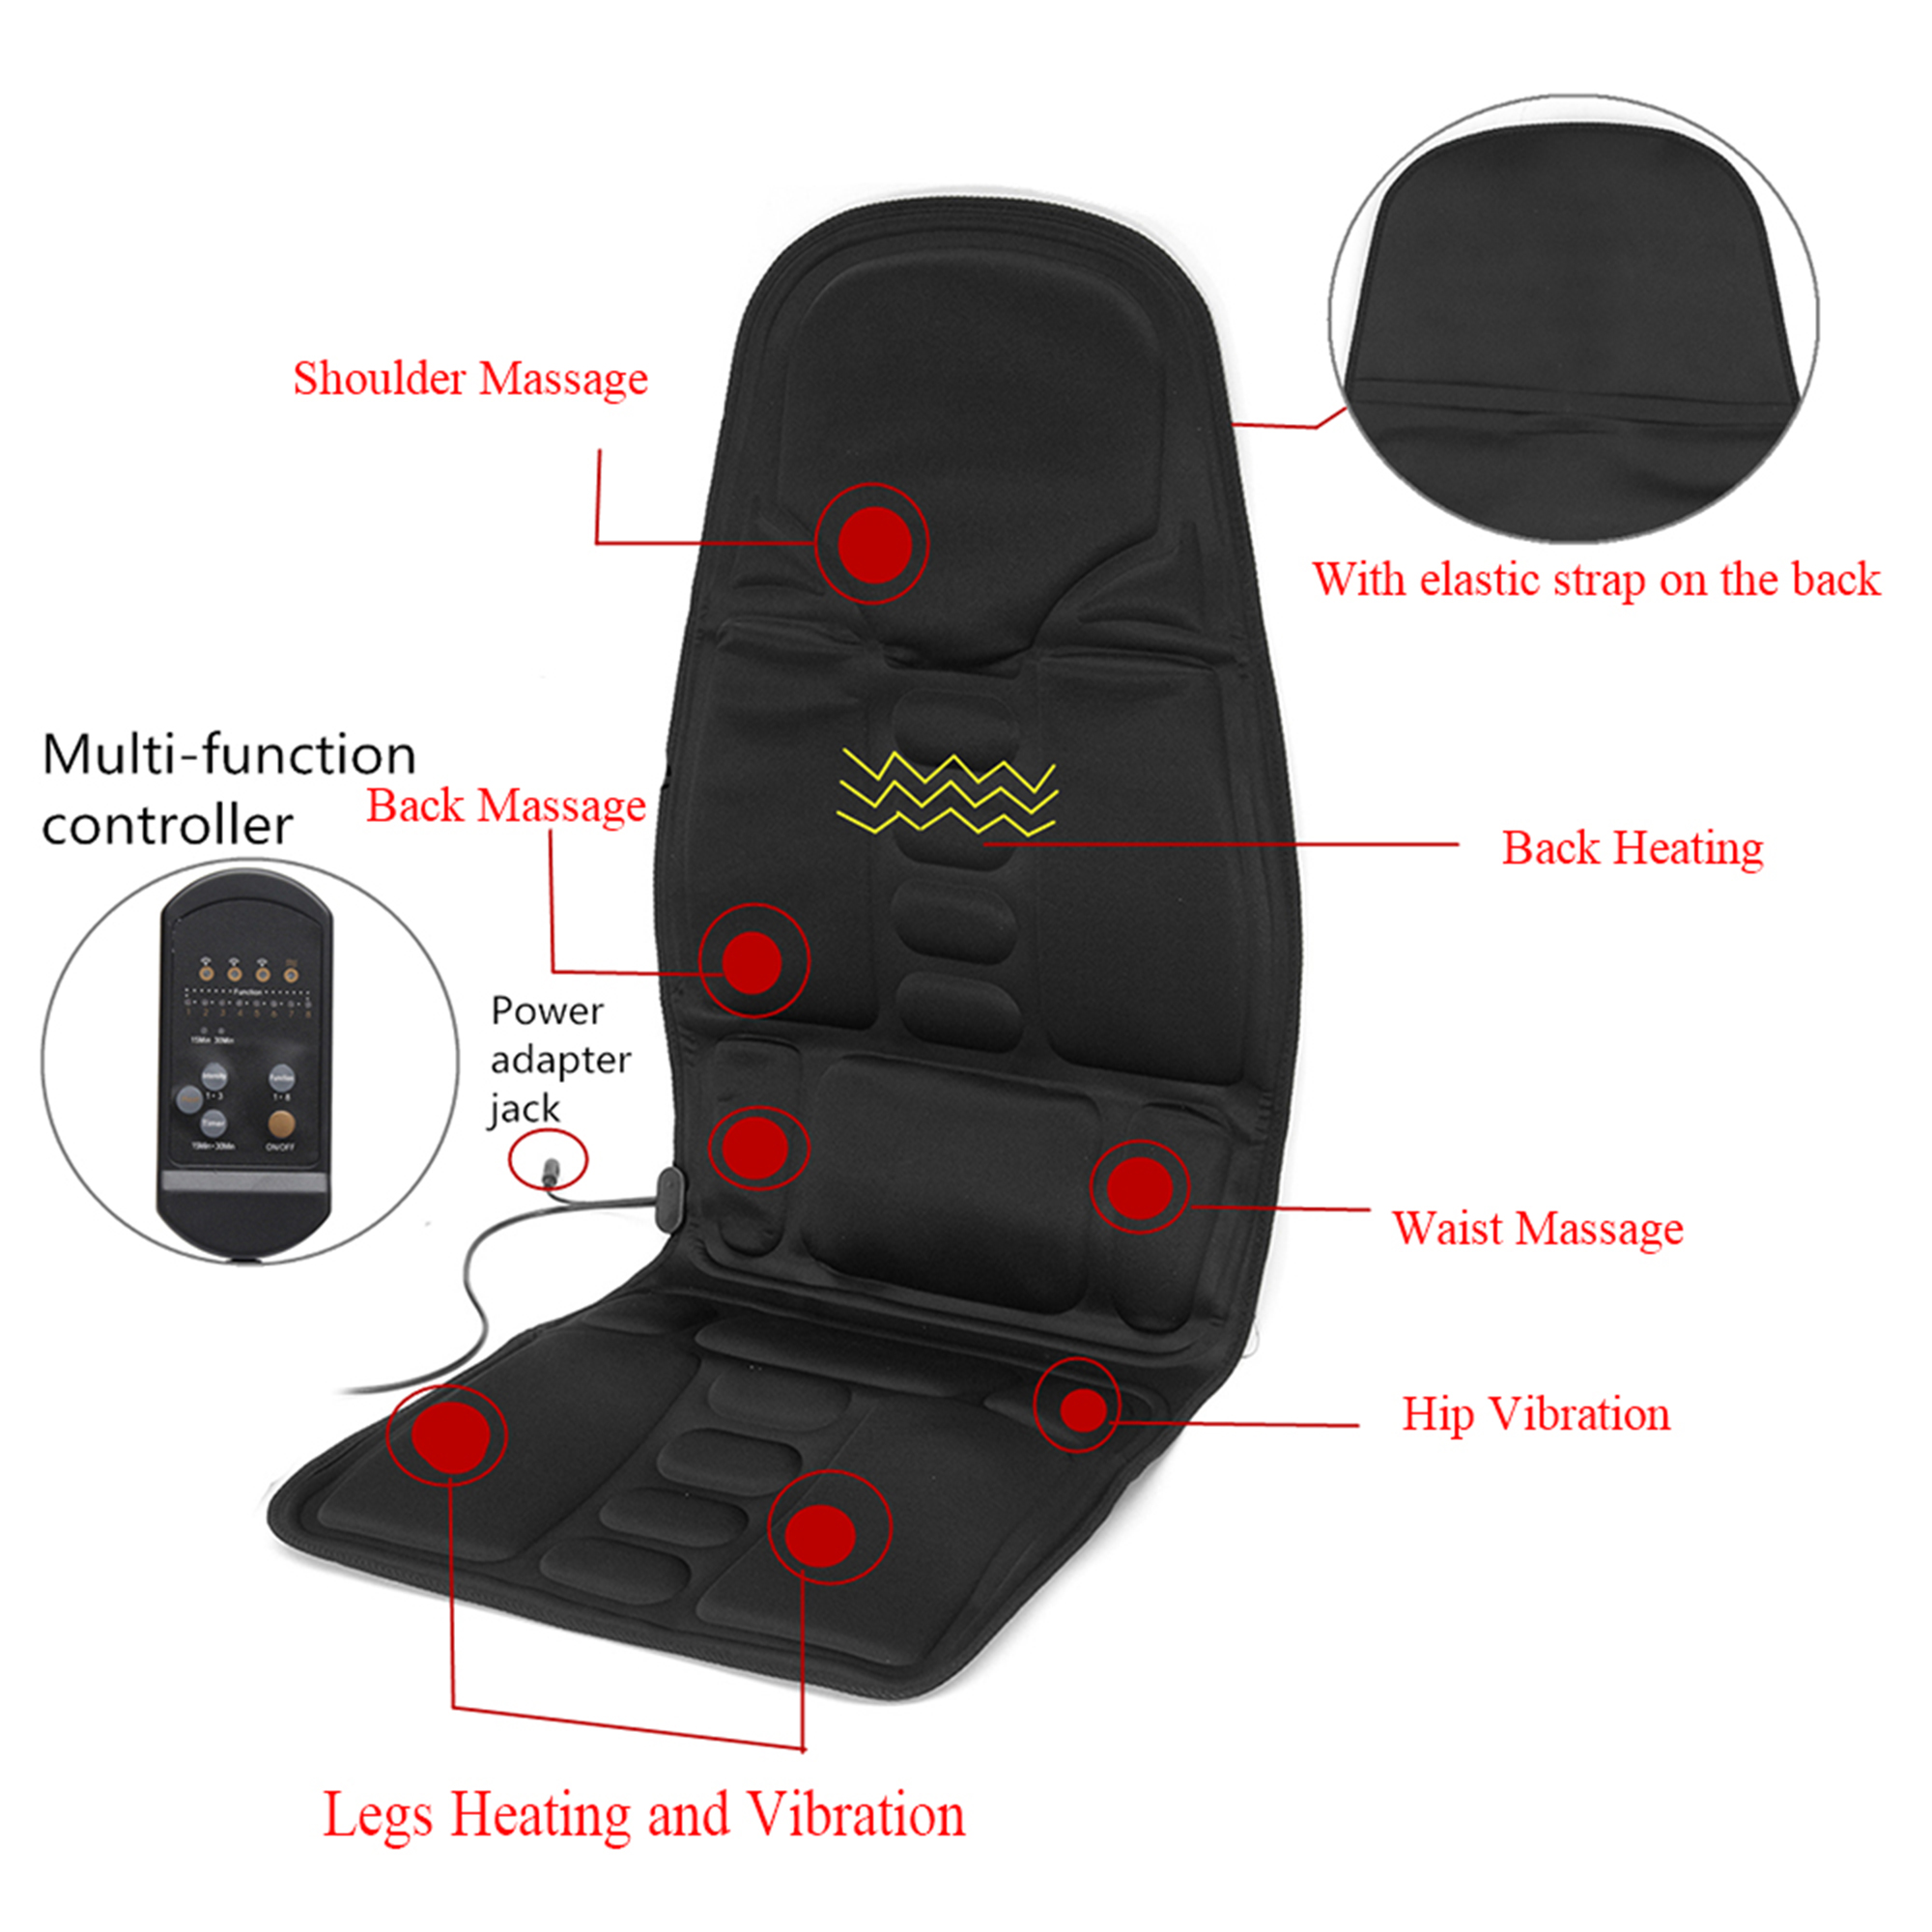 Youloveit Car Home Chair Seat Shiatsu Back and Neck Massager with Heat Kneading Massage at Home, Car, Office Massage Shiatsu Massagers Relieve Muscle Pain for Back Shoulder and Neck - image 4 of 7